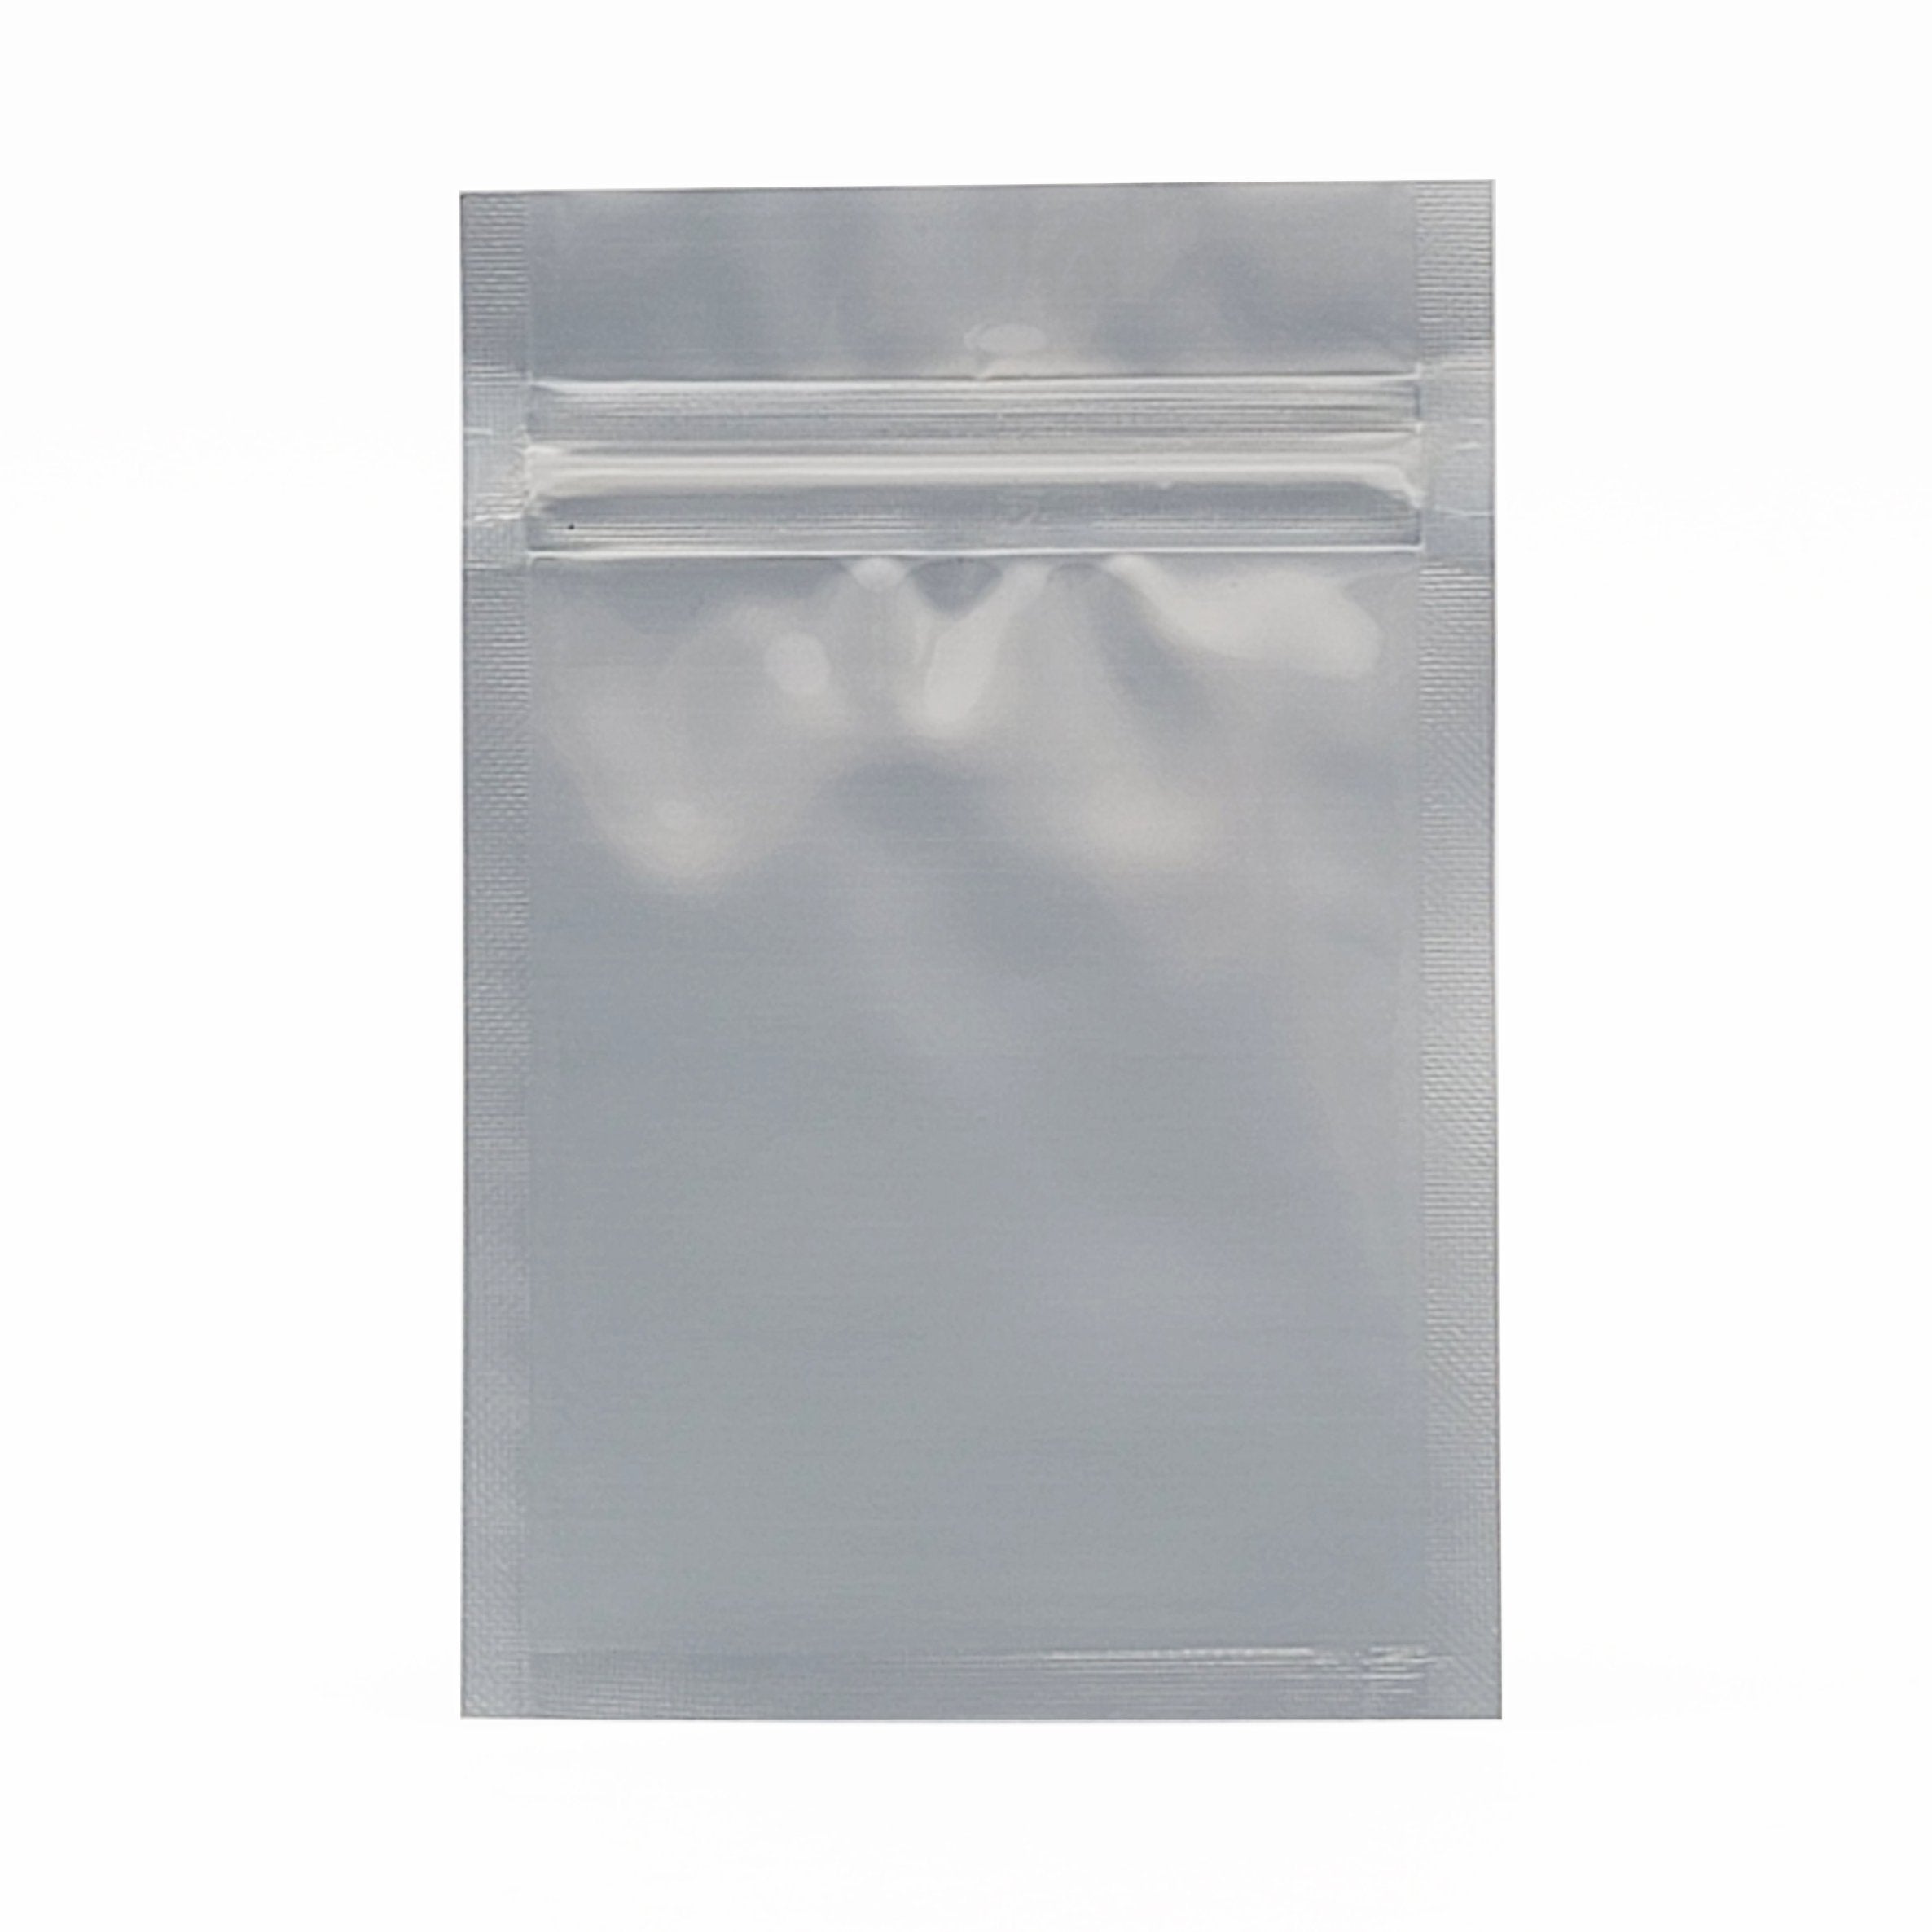 Zip Lock Bags | Zip Lock Pouch Bags | Ziplock Bags | Ziplock Pouch Bags